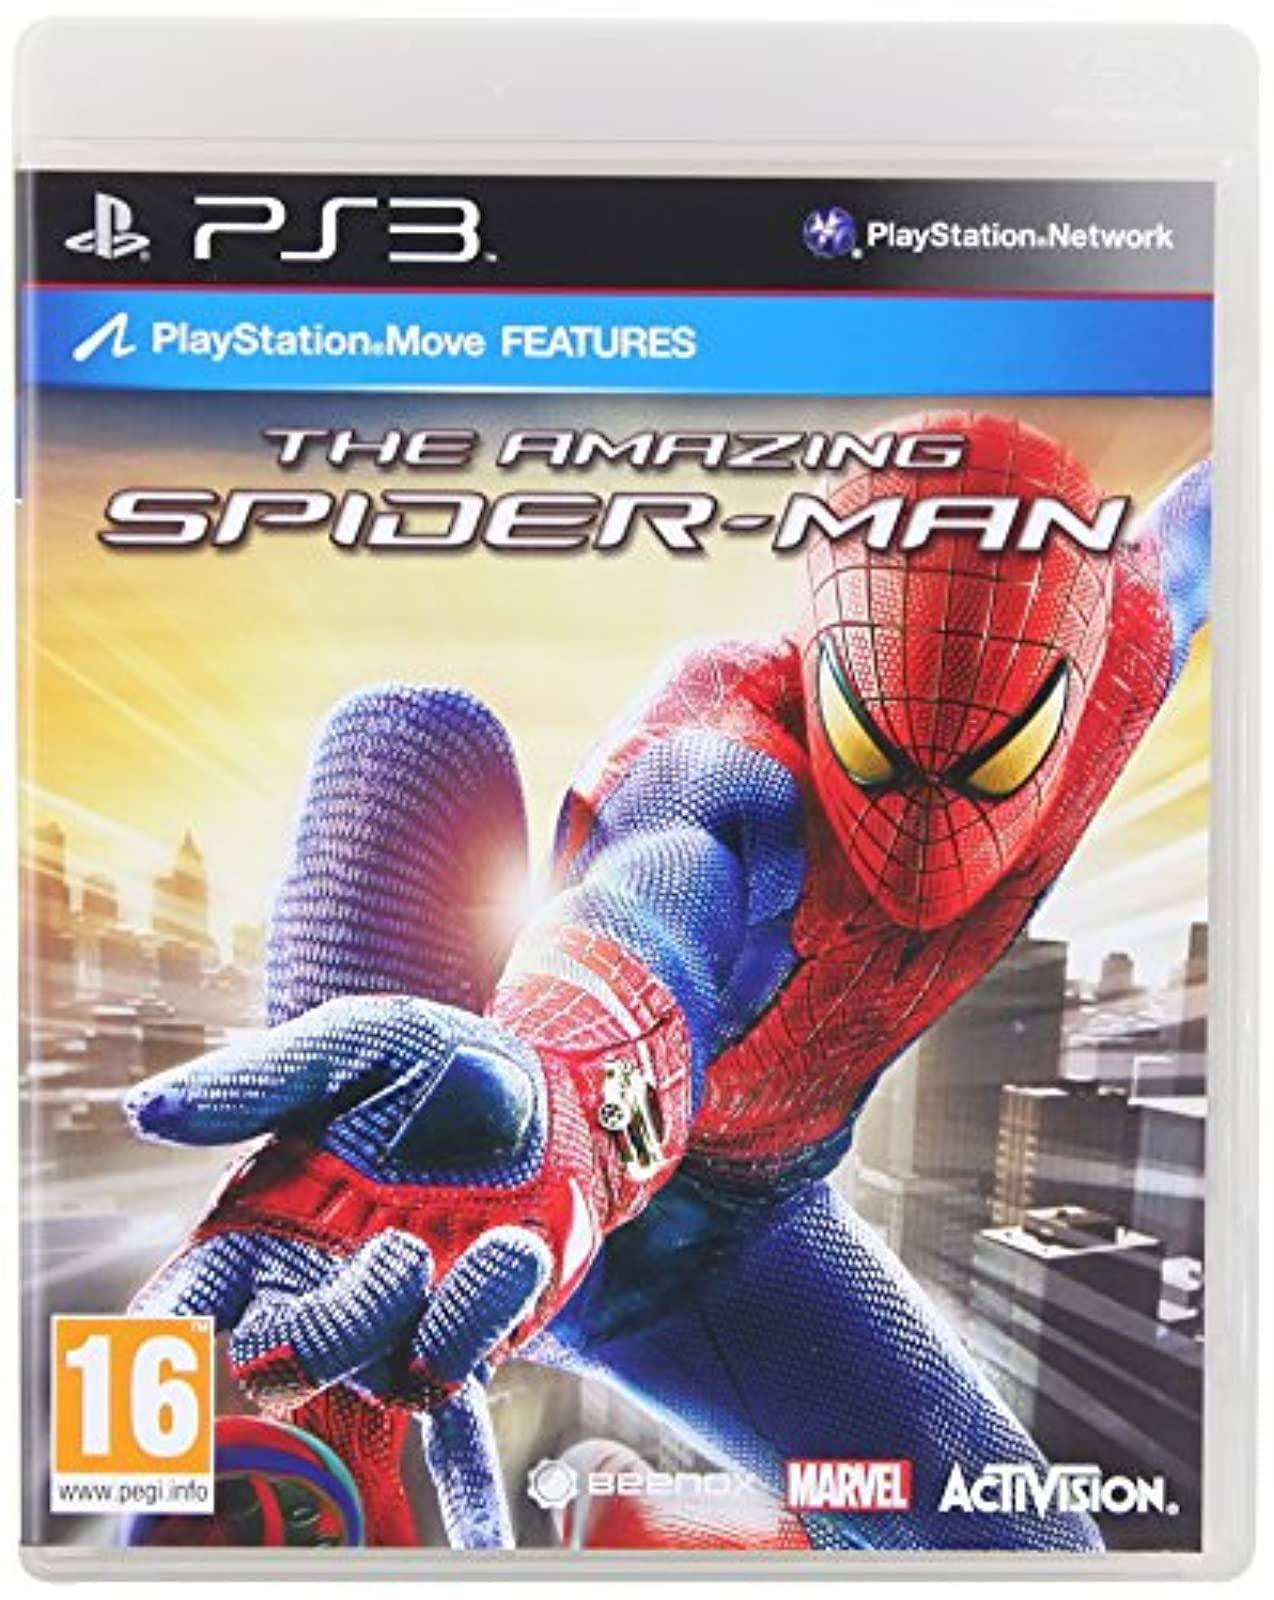 The Amazing Spiderman - PlayStation 3